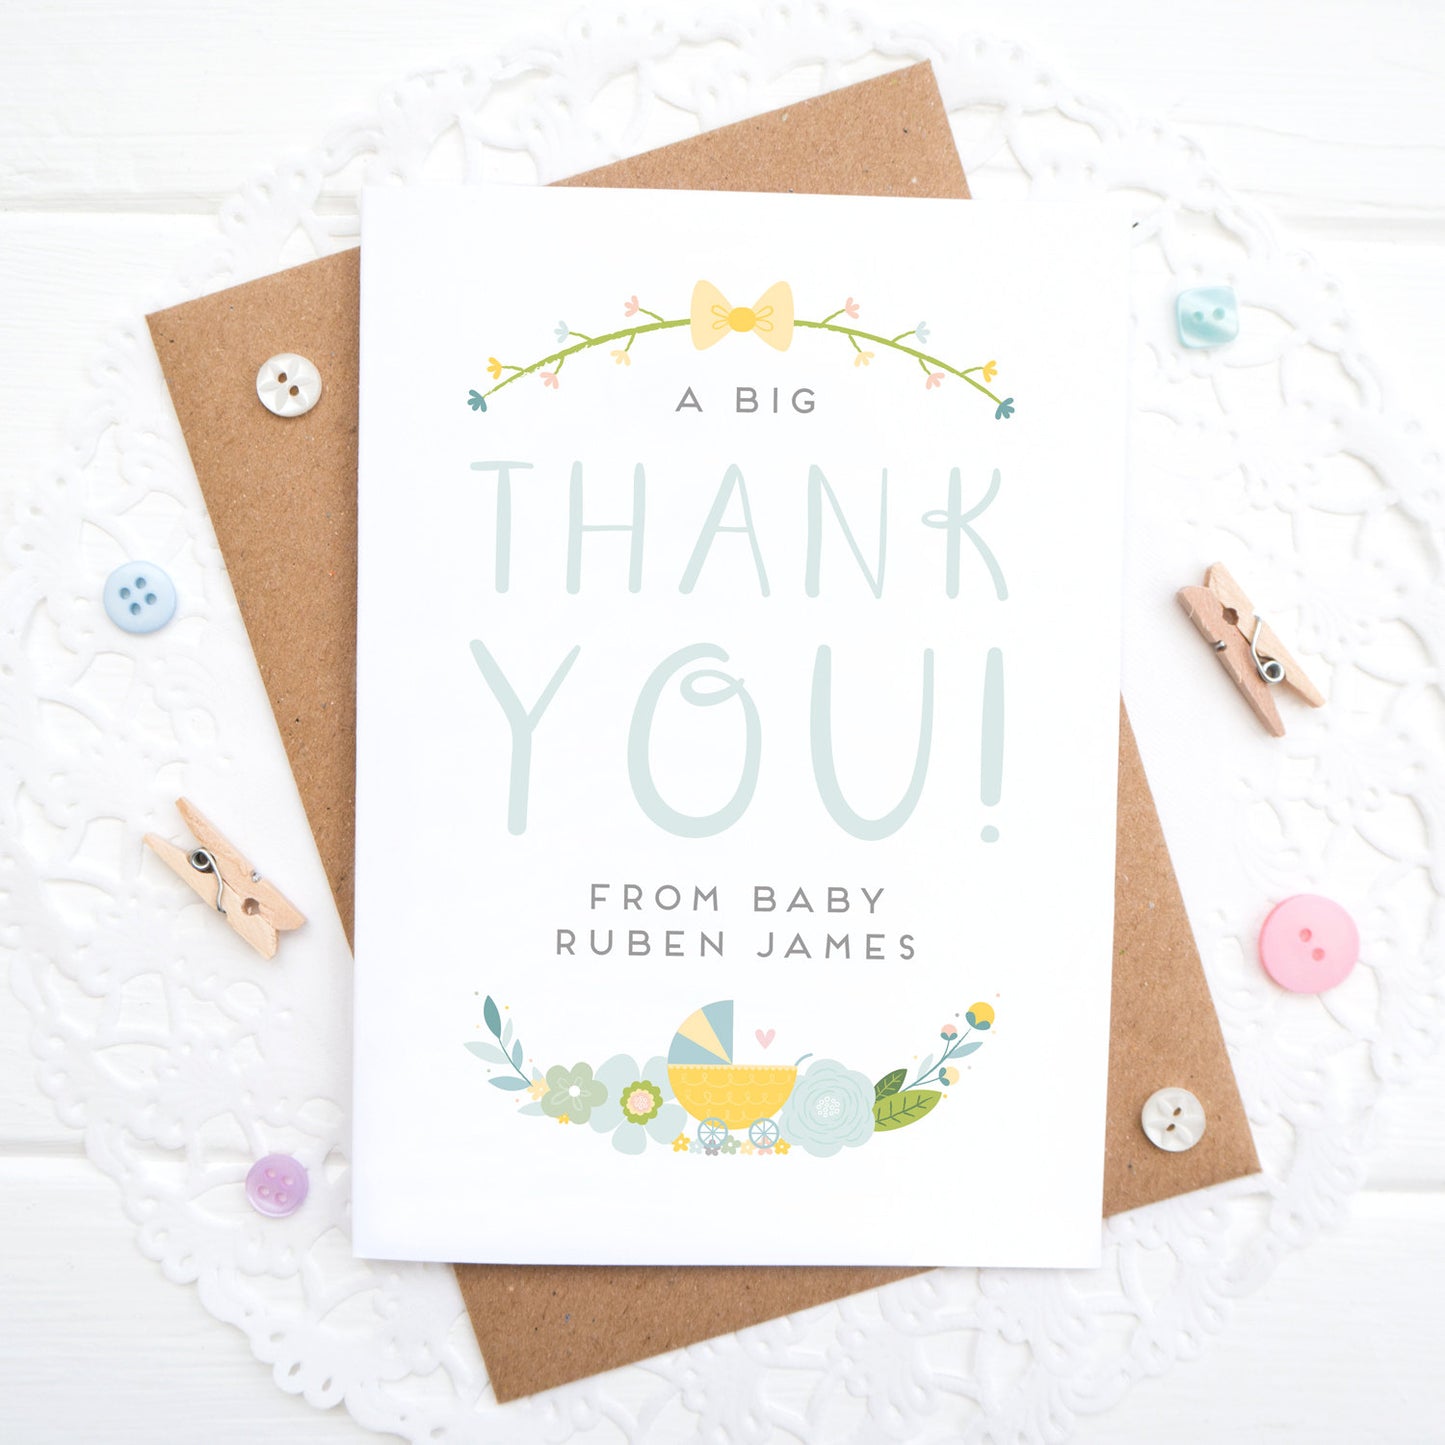 A personalised baby thank you card